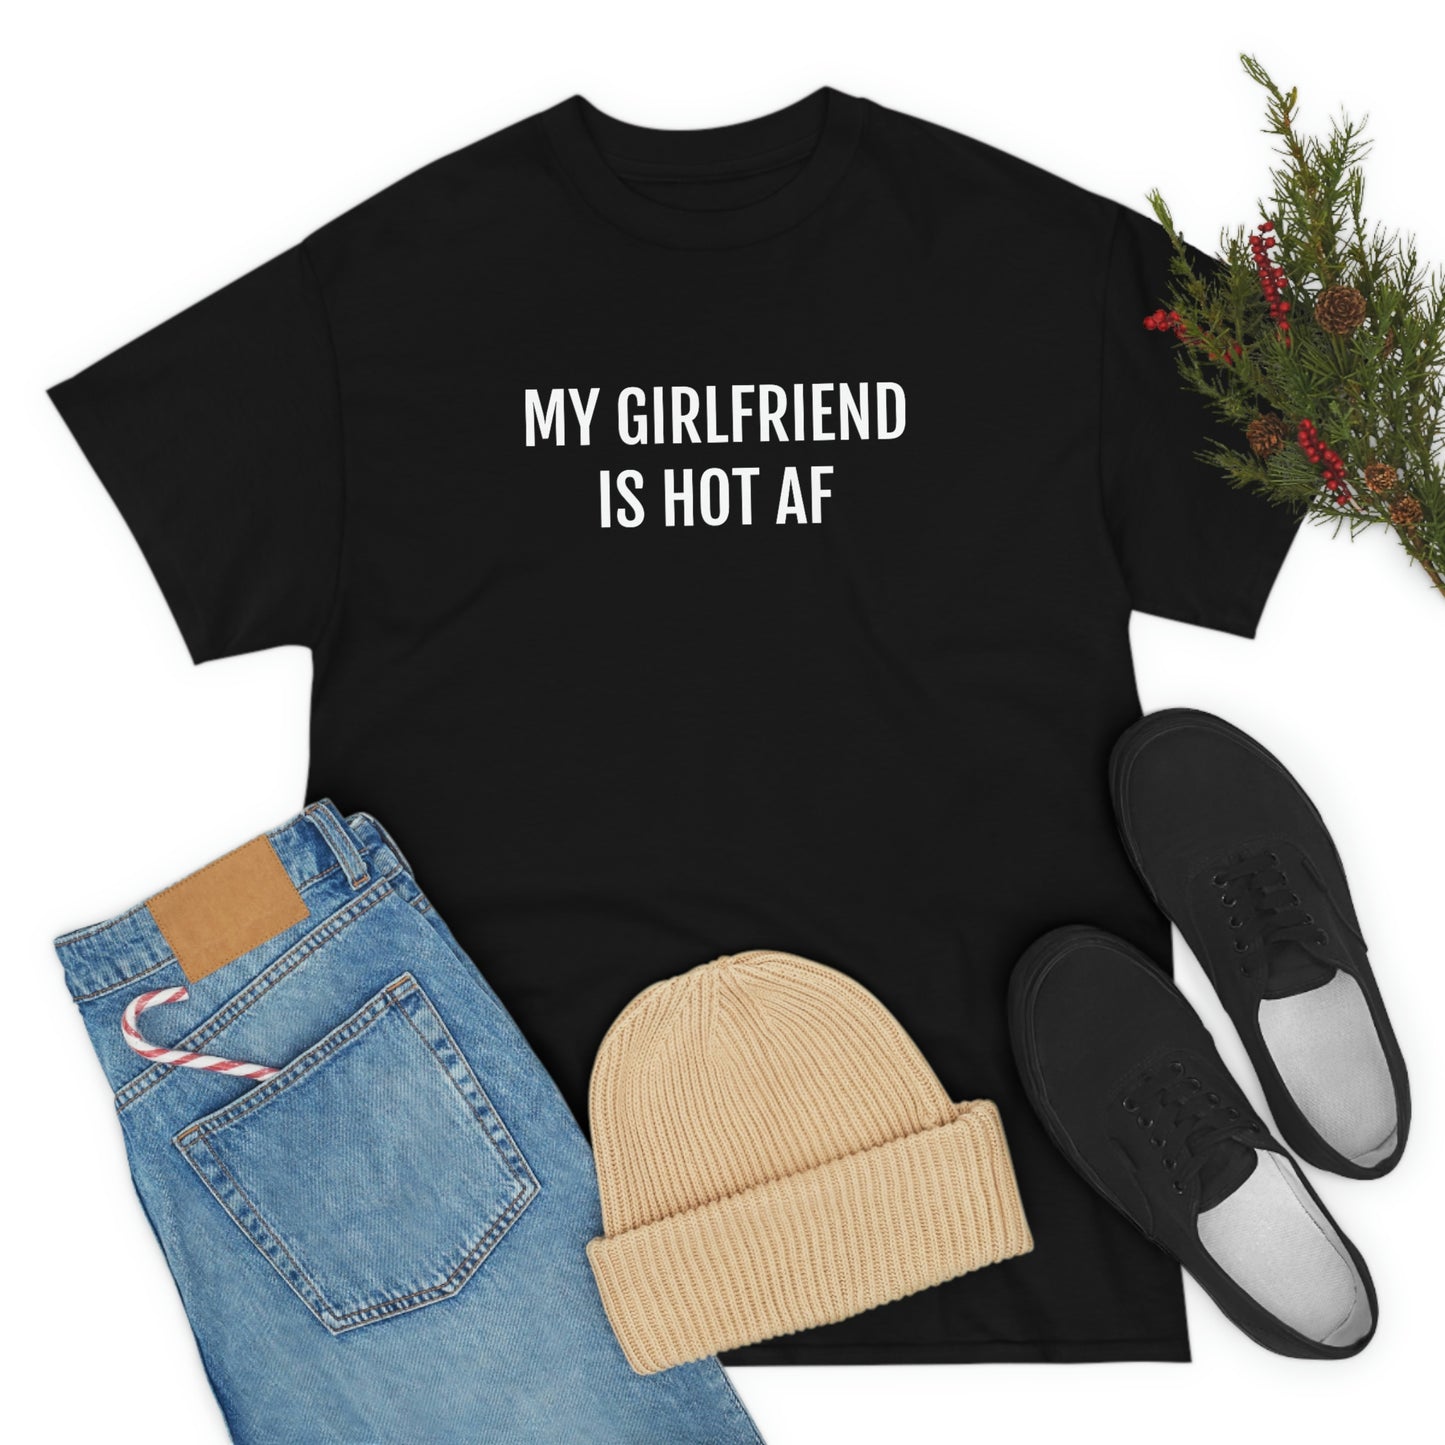 MY GIRLFRIEND IS HOT AF T-SHIRT